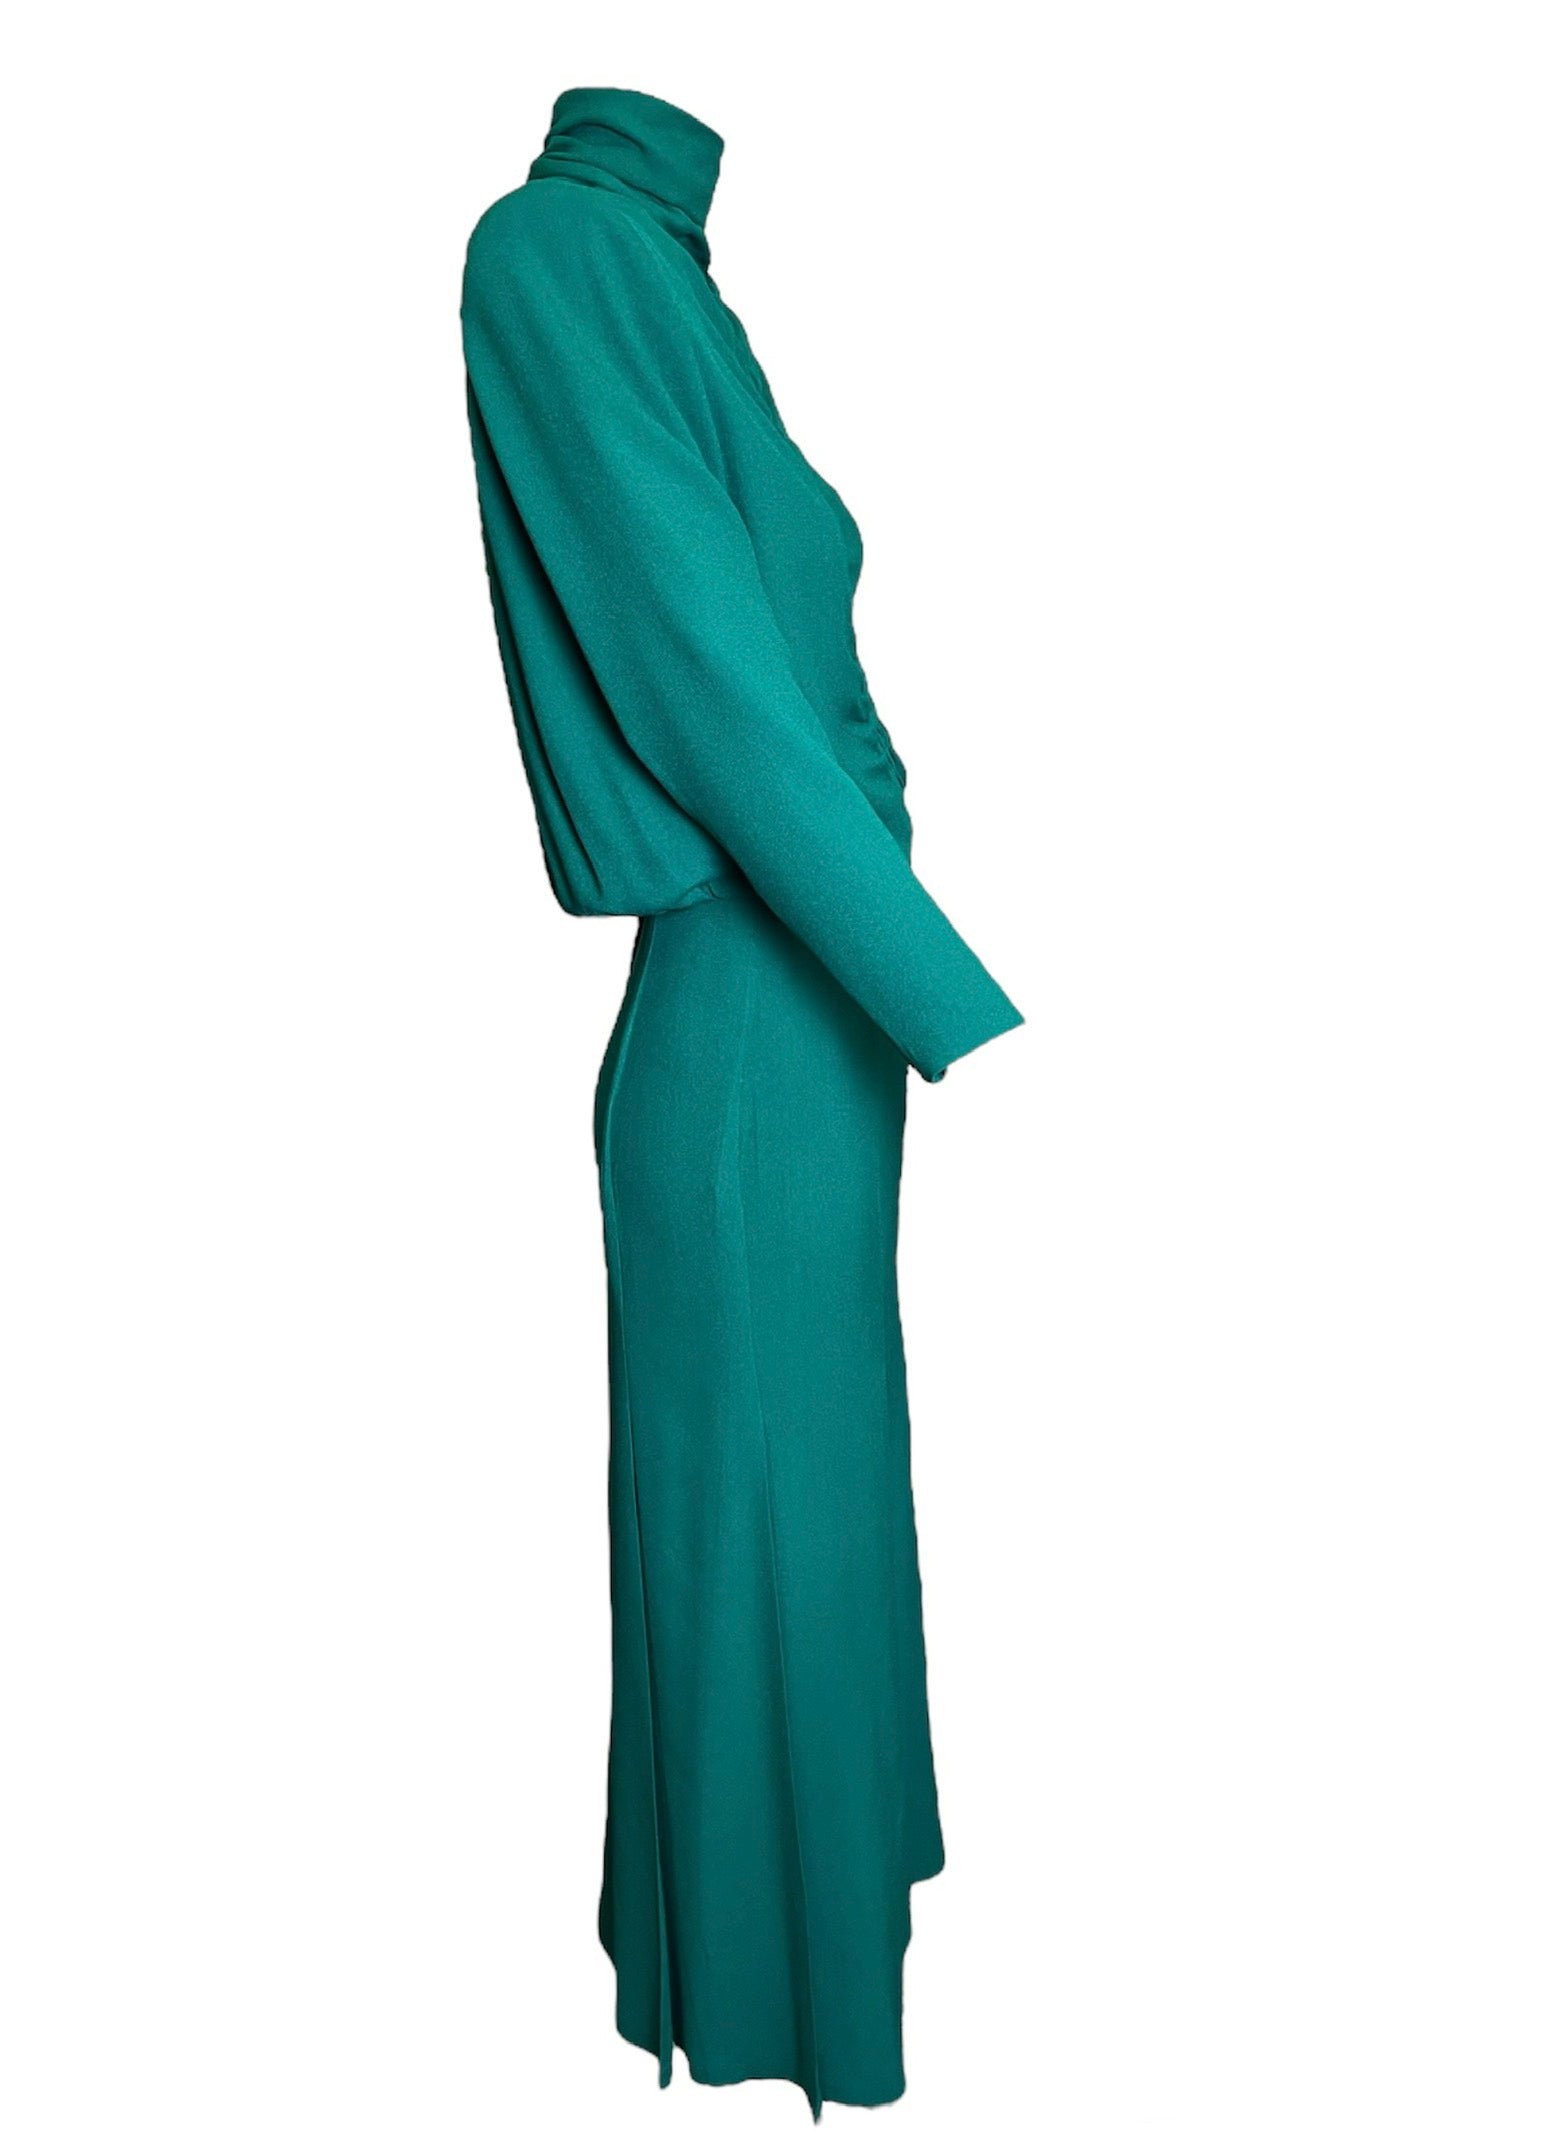 Galanos 80s Emerald Green Gown w/ Woven Front Detail SIDE PHOTO 3 OF 5